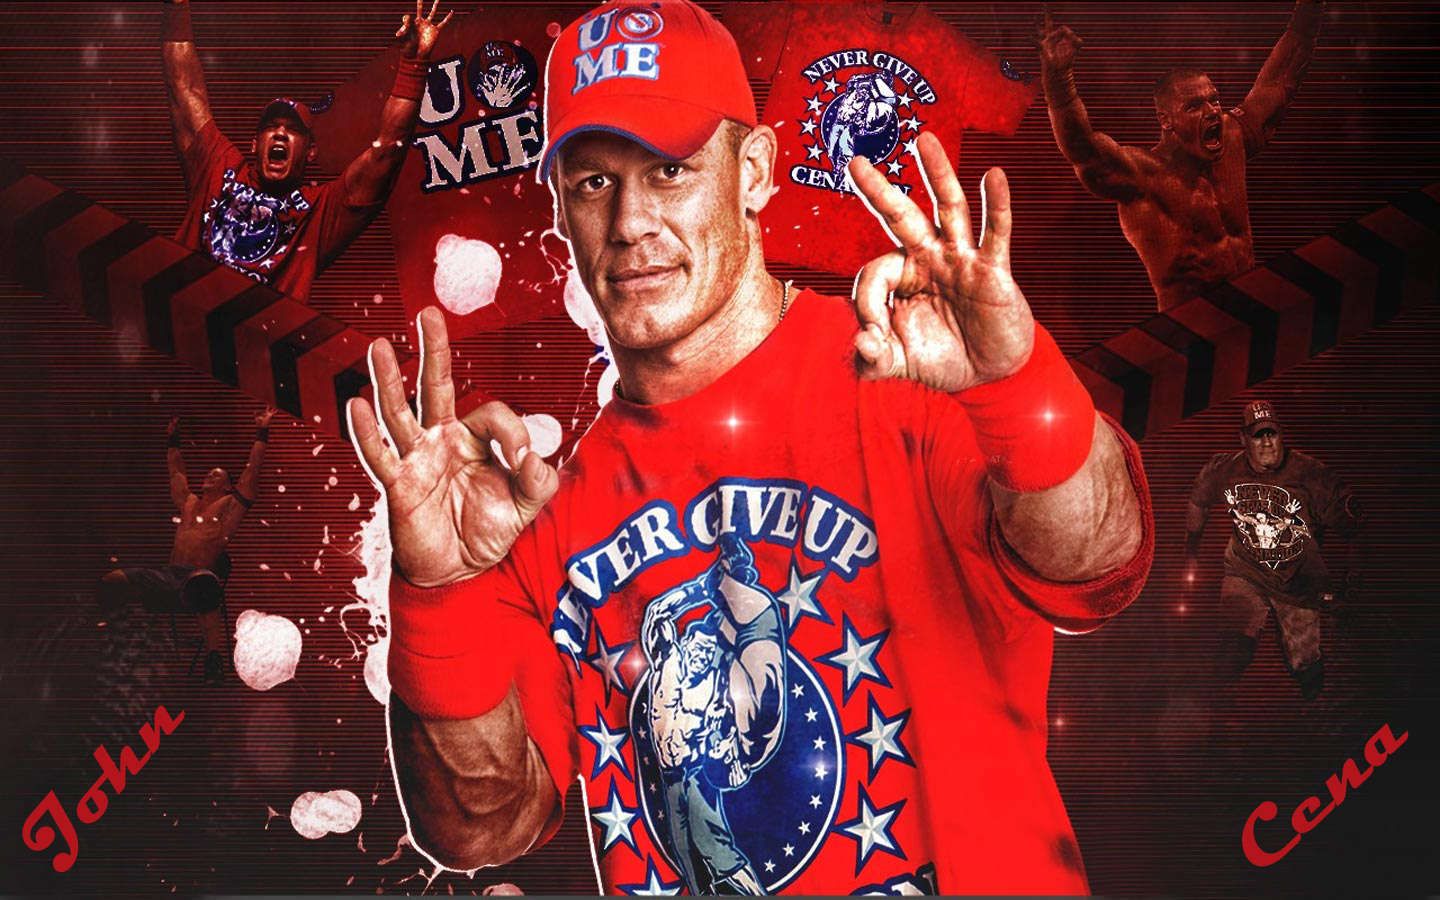 Free download John Cena HD 1440x900 on Wallpaper and Picture download on [1440x900] for your Desktop, Mobile & Tablet. Explore Johncena HD Wallpaper 2015. Johncena HD Wallpaper Johncena 2015 Wallpaper, Wallpaper Johncena